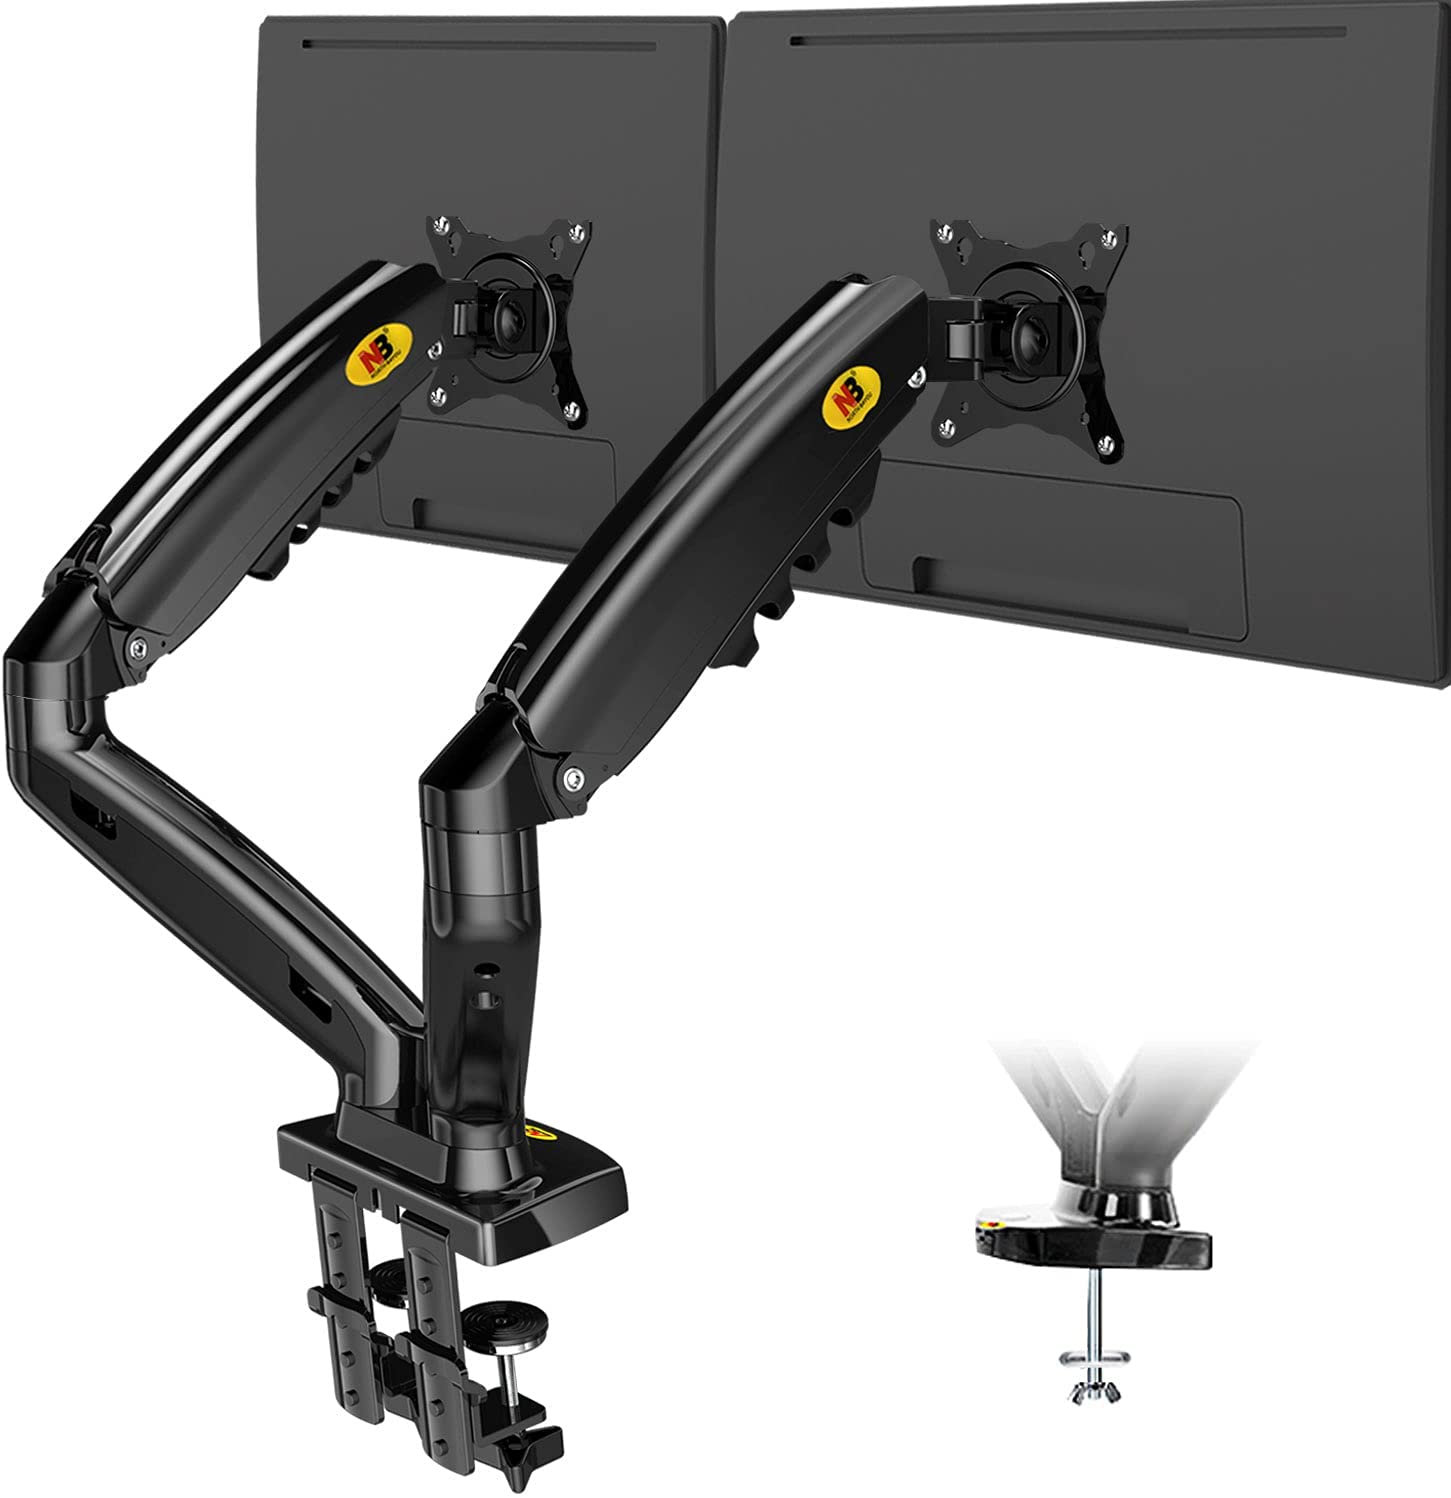 NB NORTH BAYOU DUAL MONITOR DESK MOUNT AND STAND ARM FOR TWO SCREENS 17-27 INCH